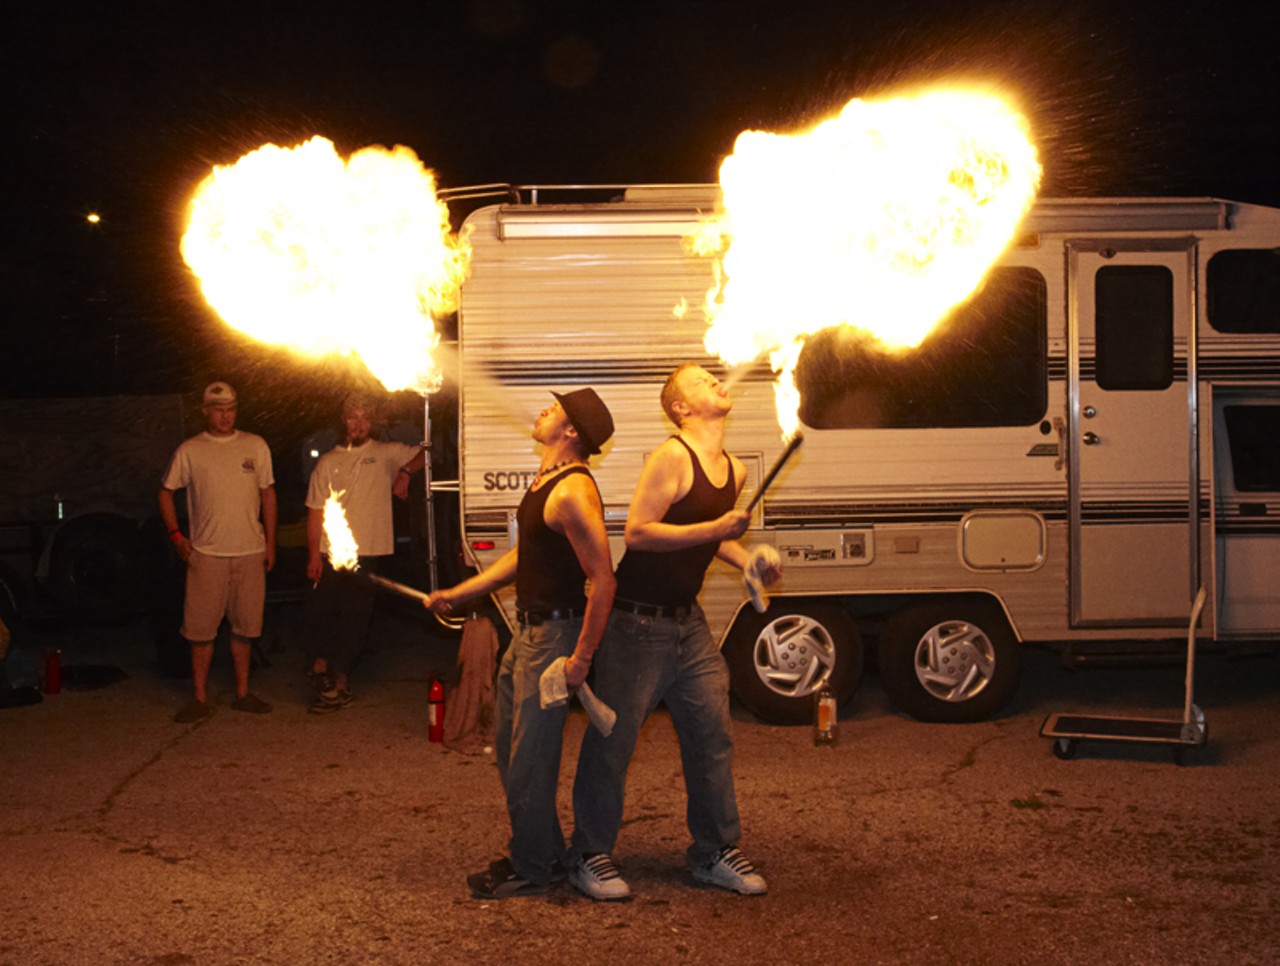 Fire-breathers at a World Hula Hoop Day party on 9/9/09 have no apparent regard for the safety of the people who live in that trailer behind them. See more photos.